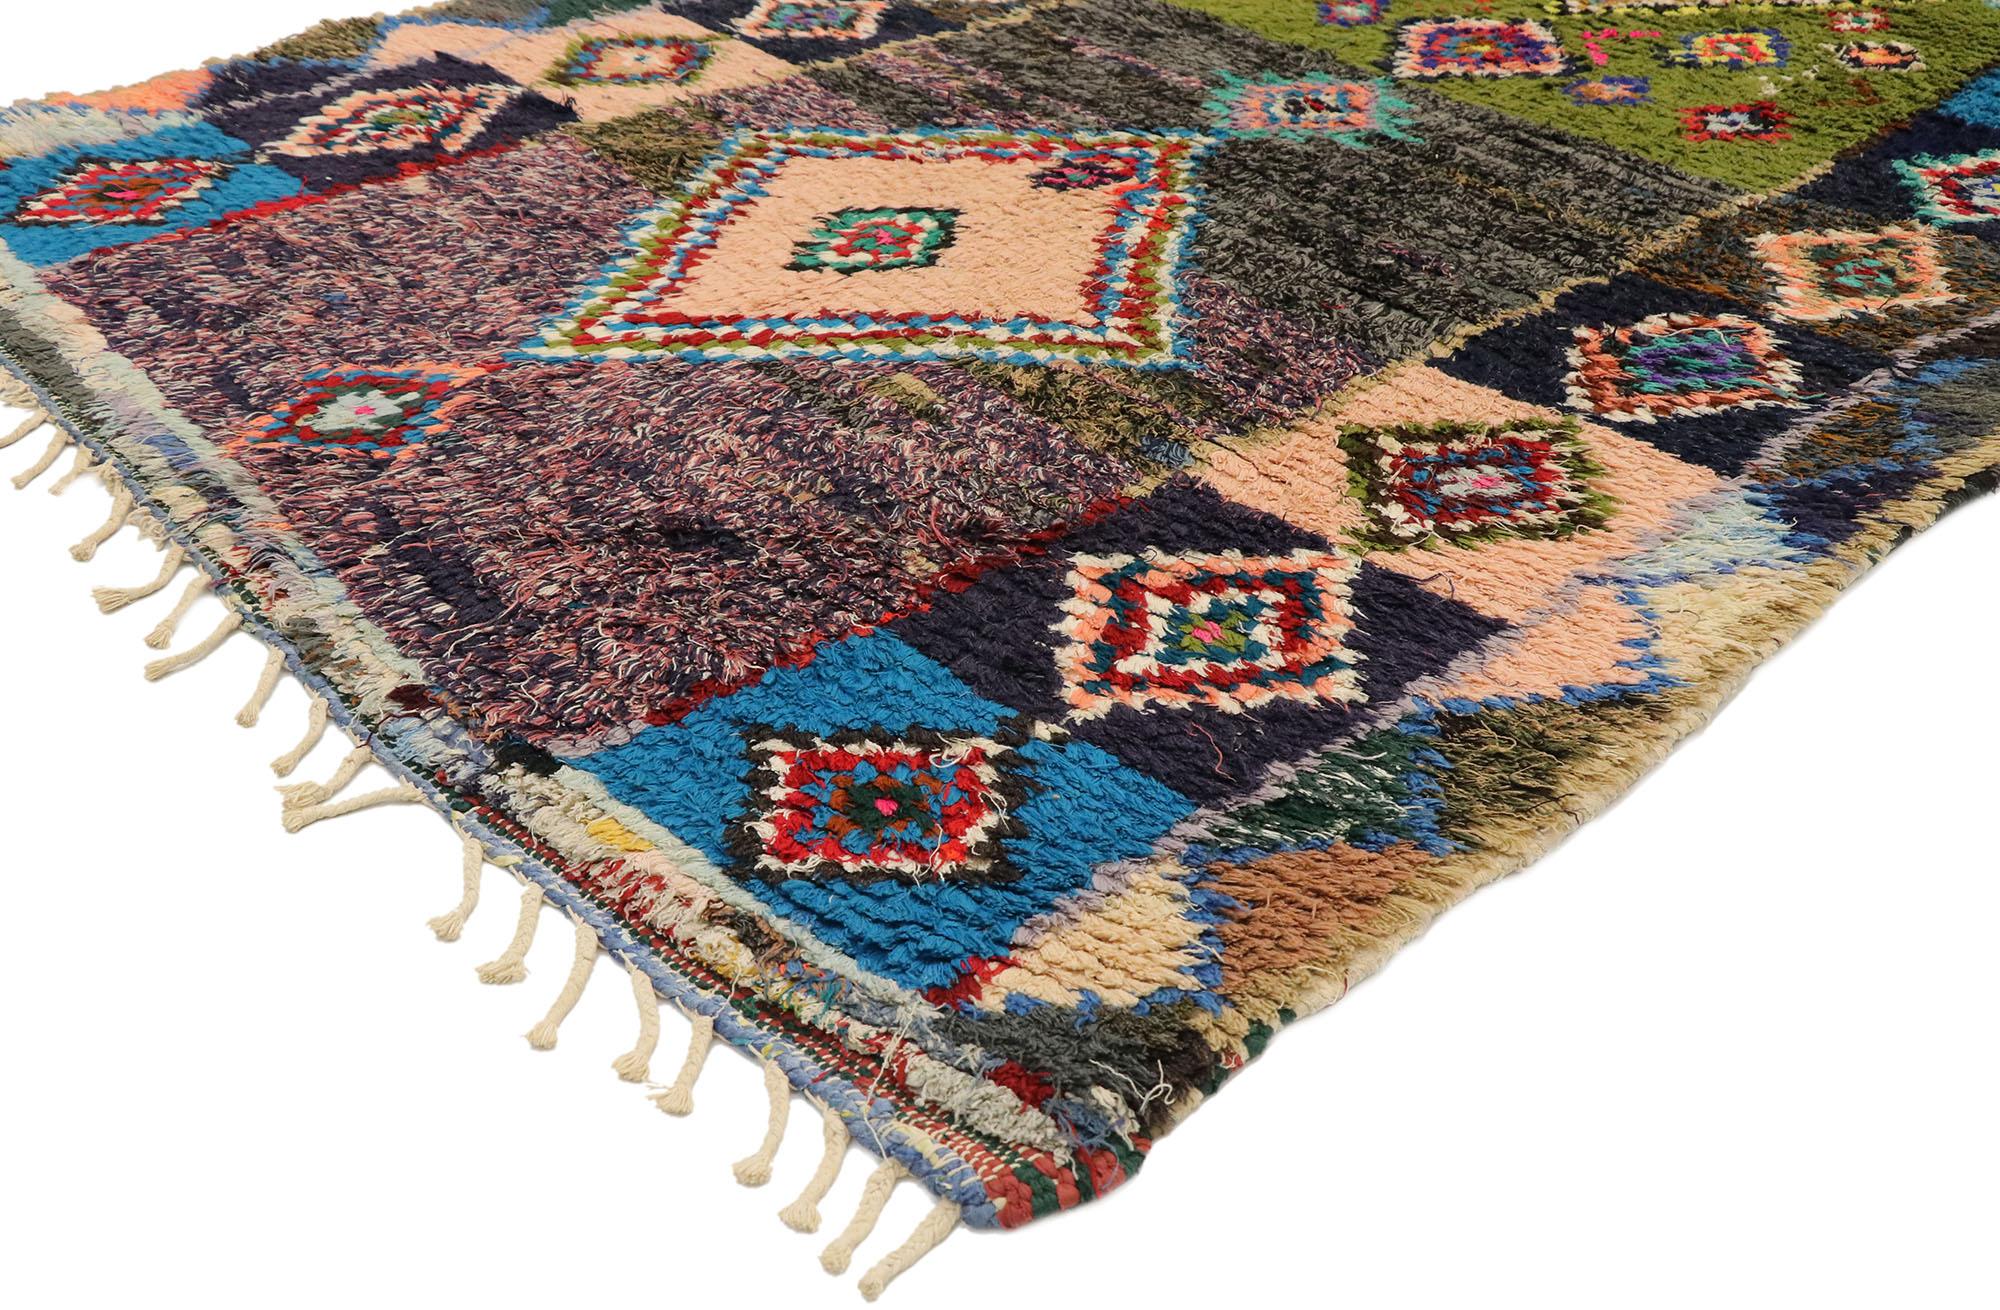 20622 Vintage Berber Moroccan Azilal Rug, 04'00 x 07'08. Enter the enchanting world of Azilal rugs, where every thread weaves a narrative spun with precision by skilled artisans amidst the dynamic landscapes of central Morocco and the majestic High